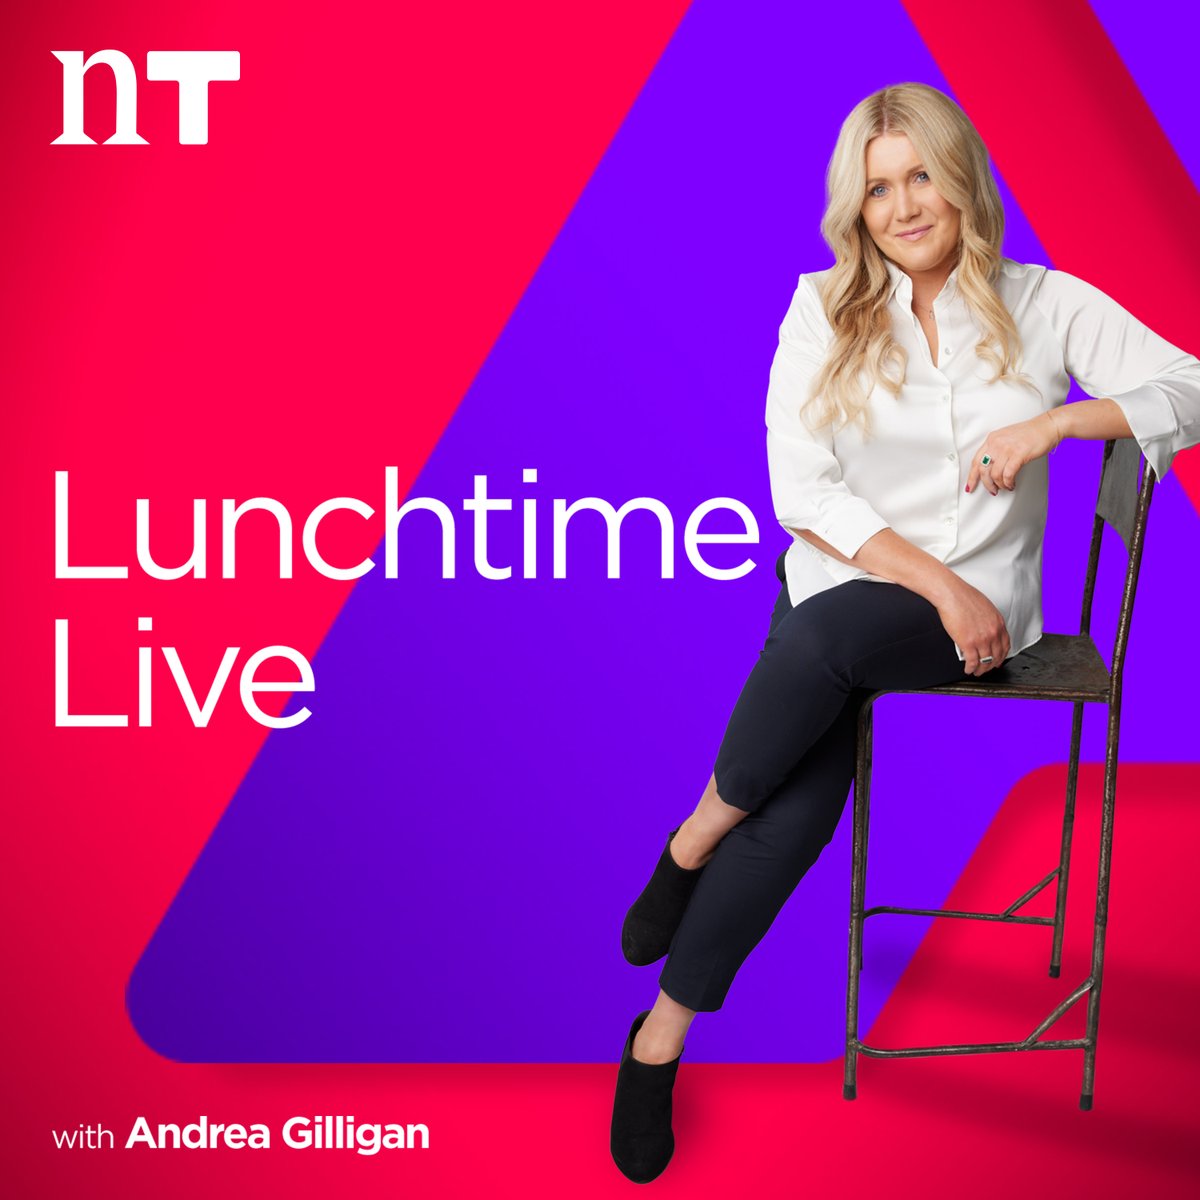 Coming up | 12pm with @andreagilligan ➡️Should we pay obese people to lose weight? ⏰Throwback Thursday @CiaranOConn0r ✈️Avoiding travel mistakes @platinumtrav 🔒Do you pick the same PIN number? @jesskellynt 🔨Home Squad: Bad Improvements @ExpertHardware #LunchTimeLiveNT